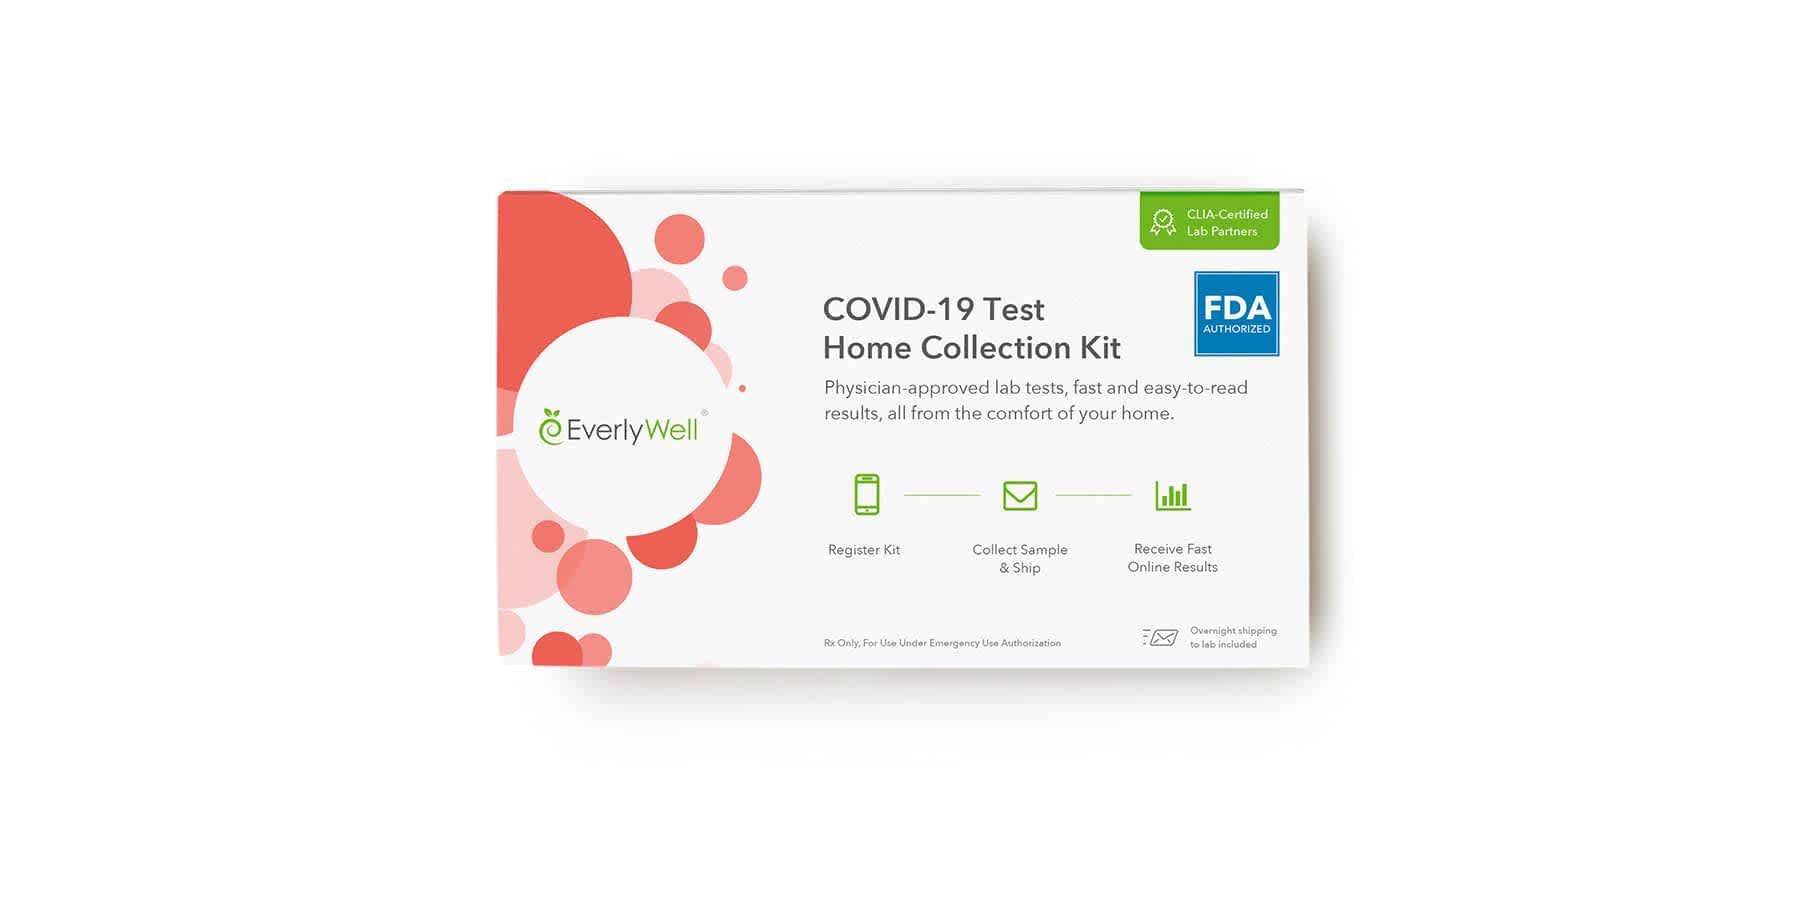 Are Everlywell Tests Covered by FSA/HSA?